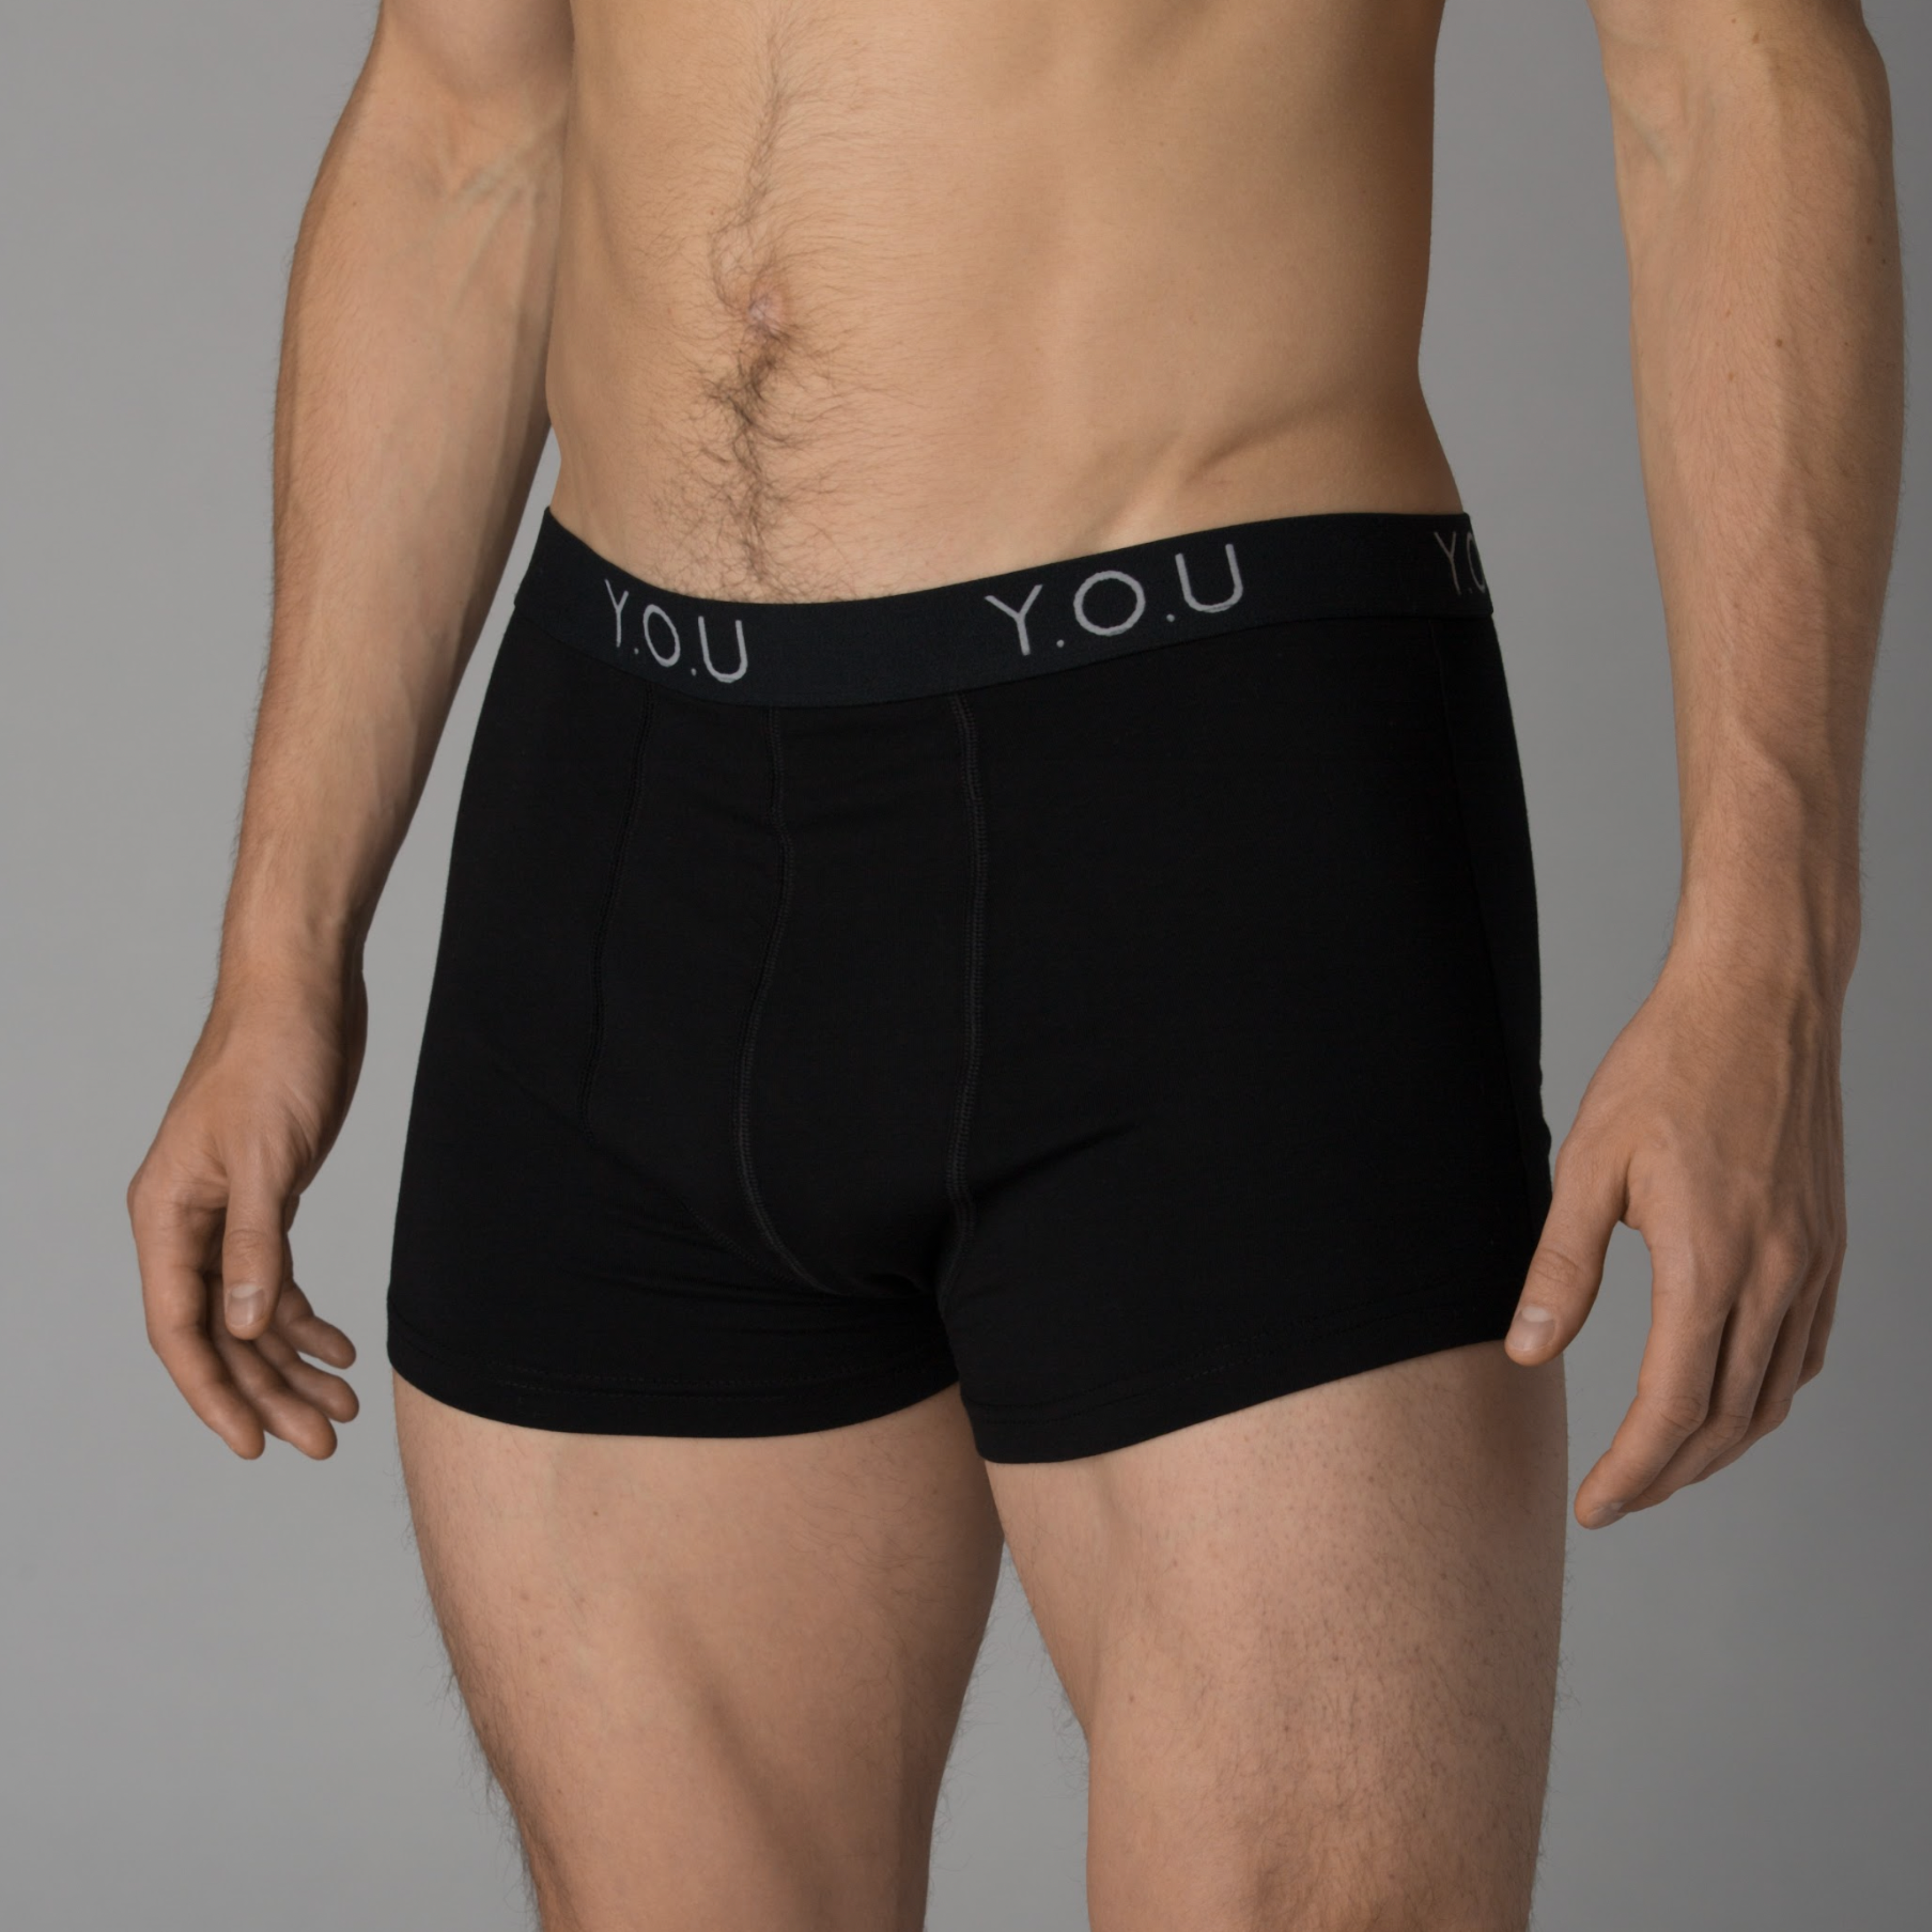 A man is modeling black hipster trunks with "Y.O.U" on the waistband. His upper body is shirtless, and the photo is taken against a plain grey background.